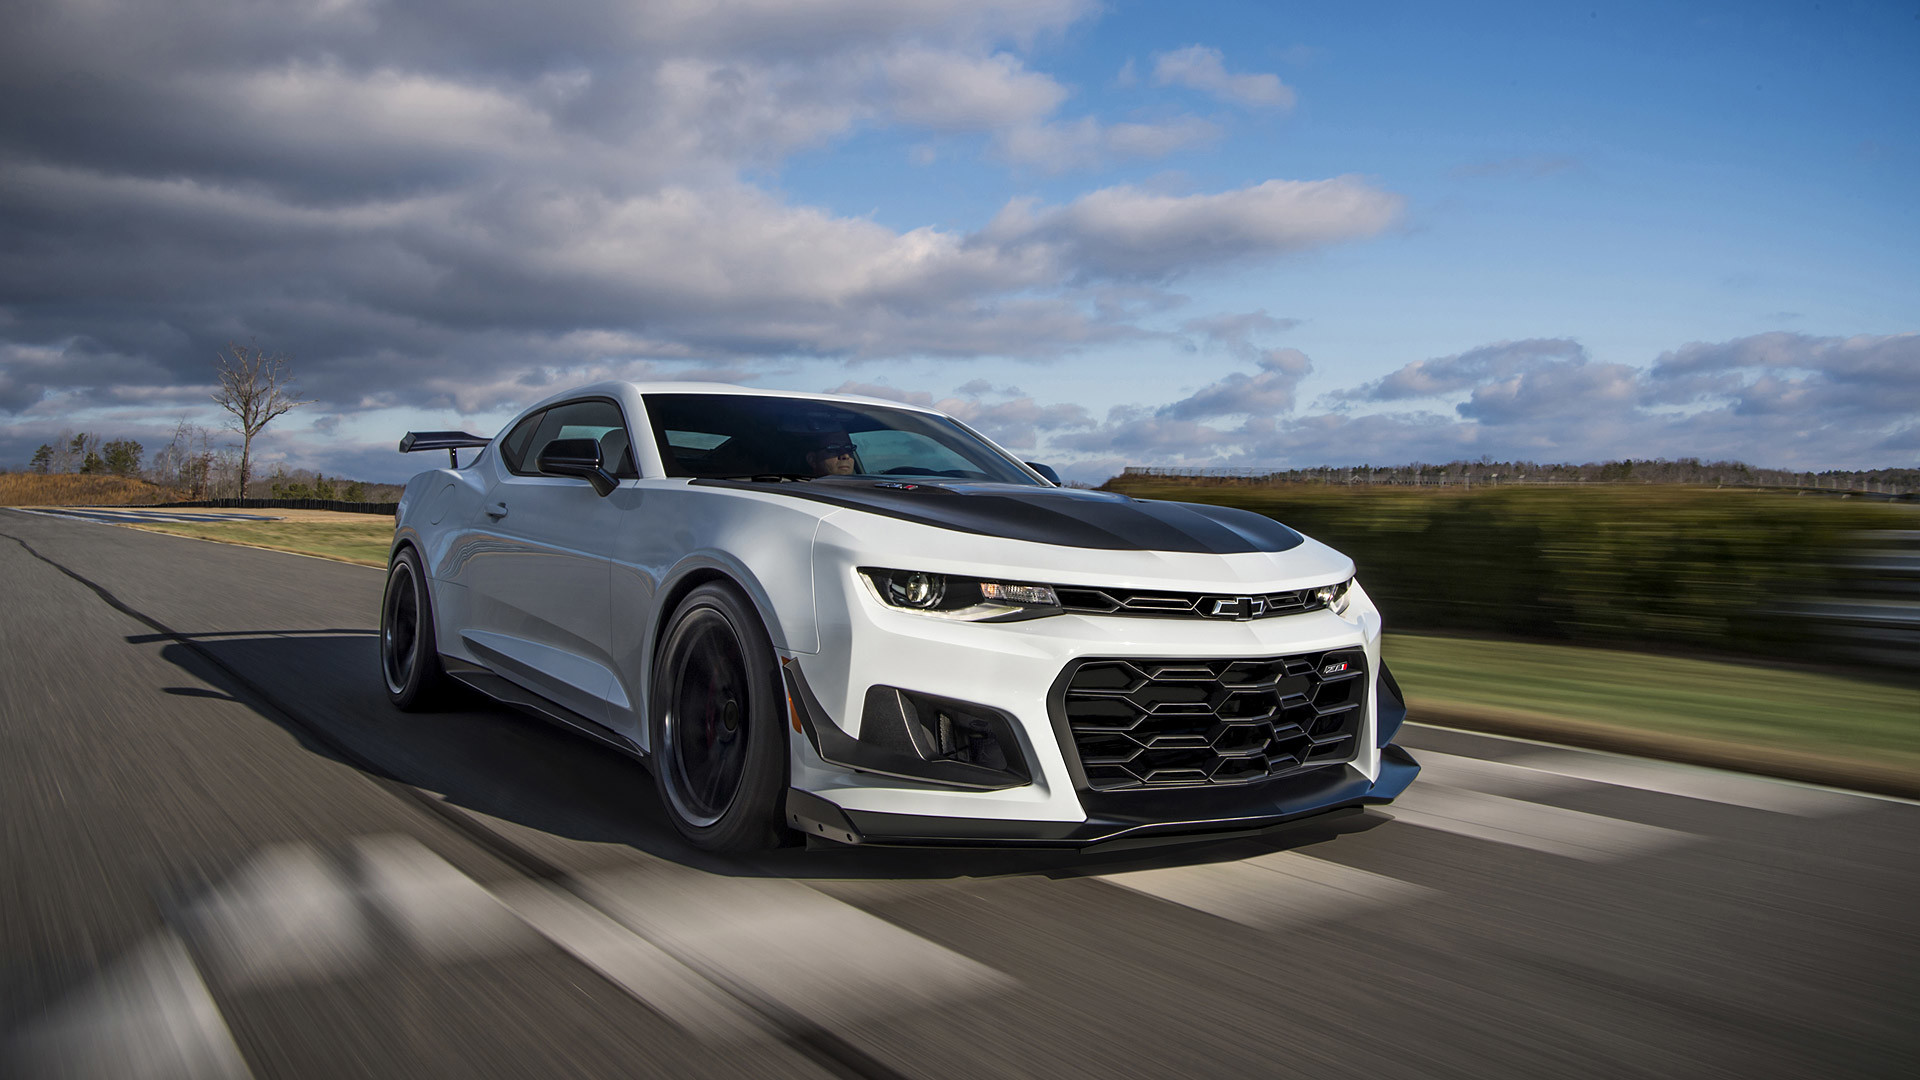 Zl1 Wallpapers